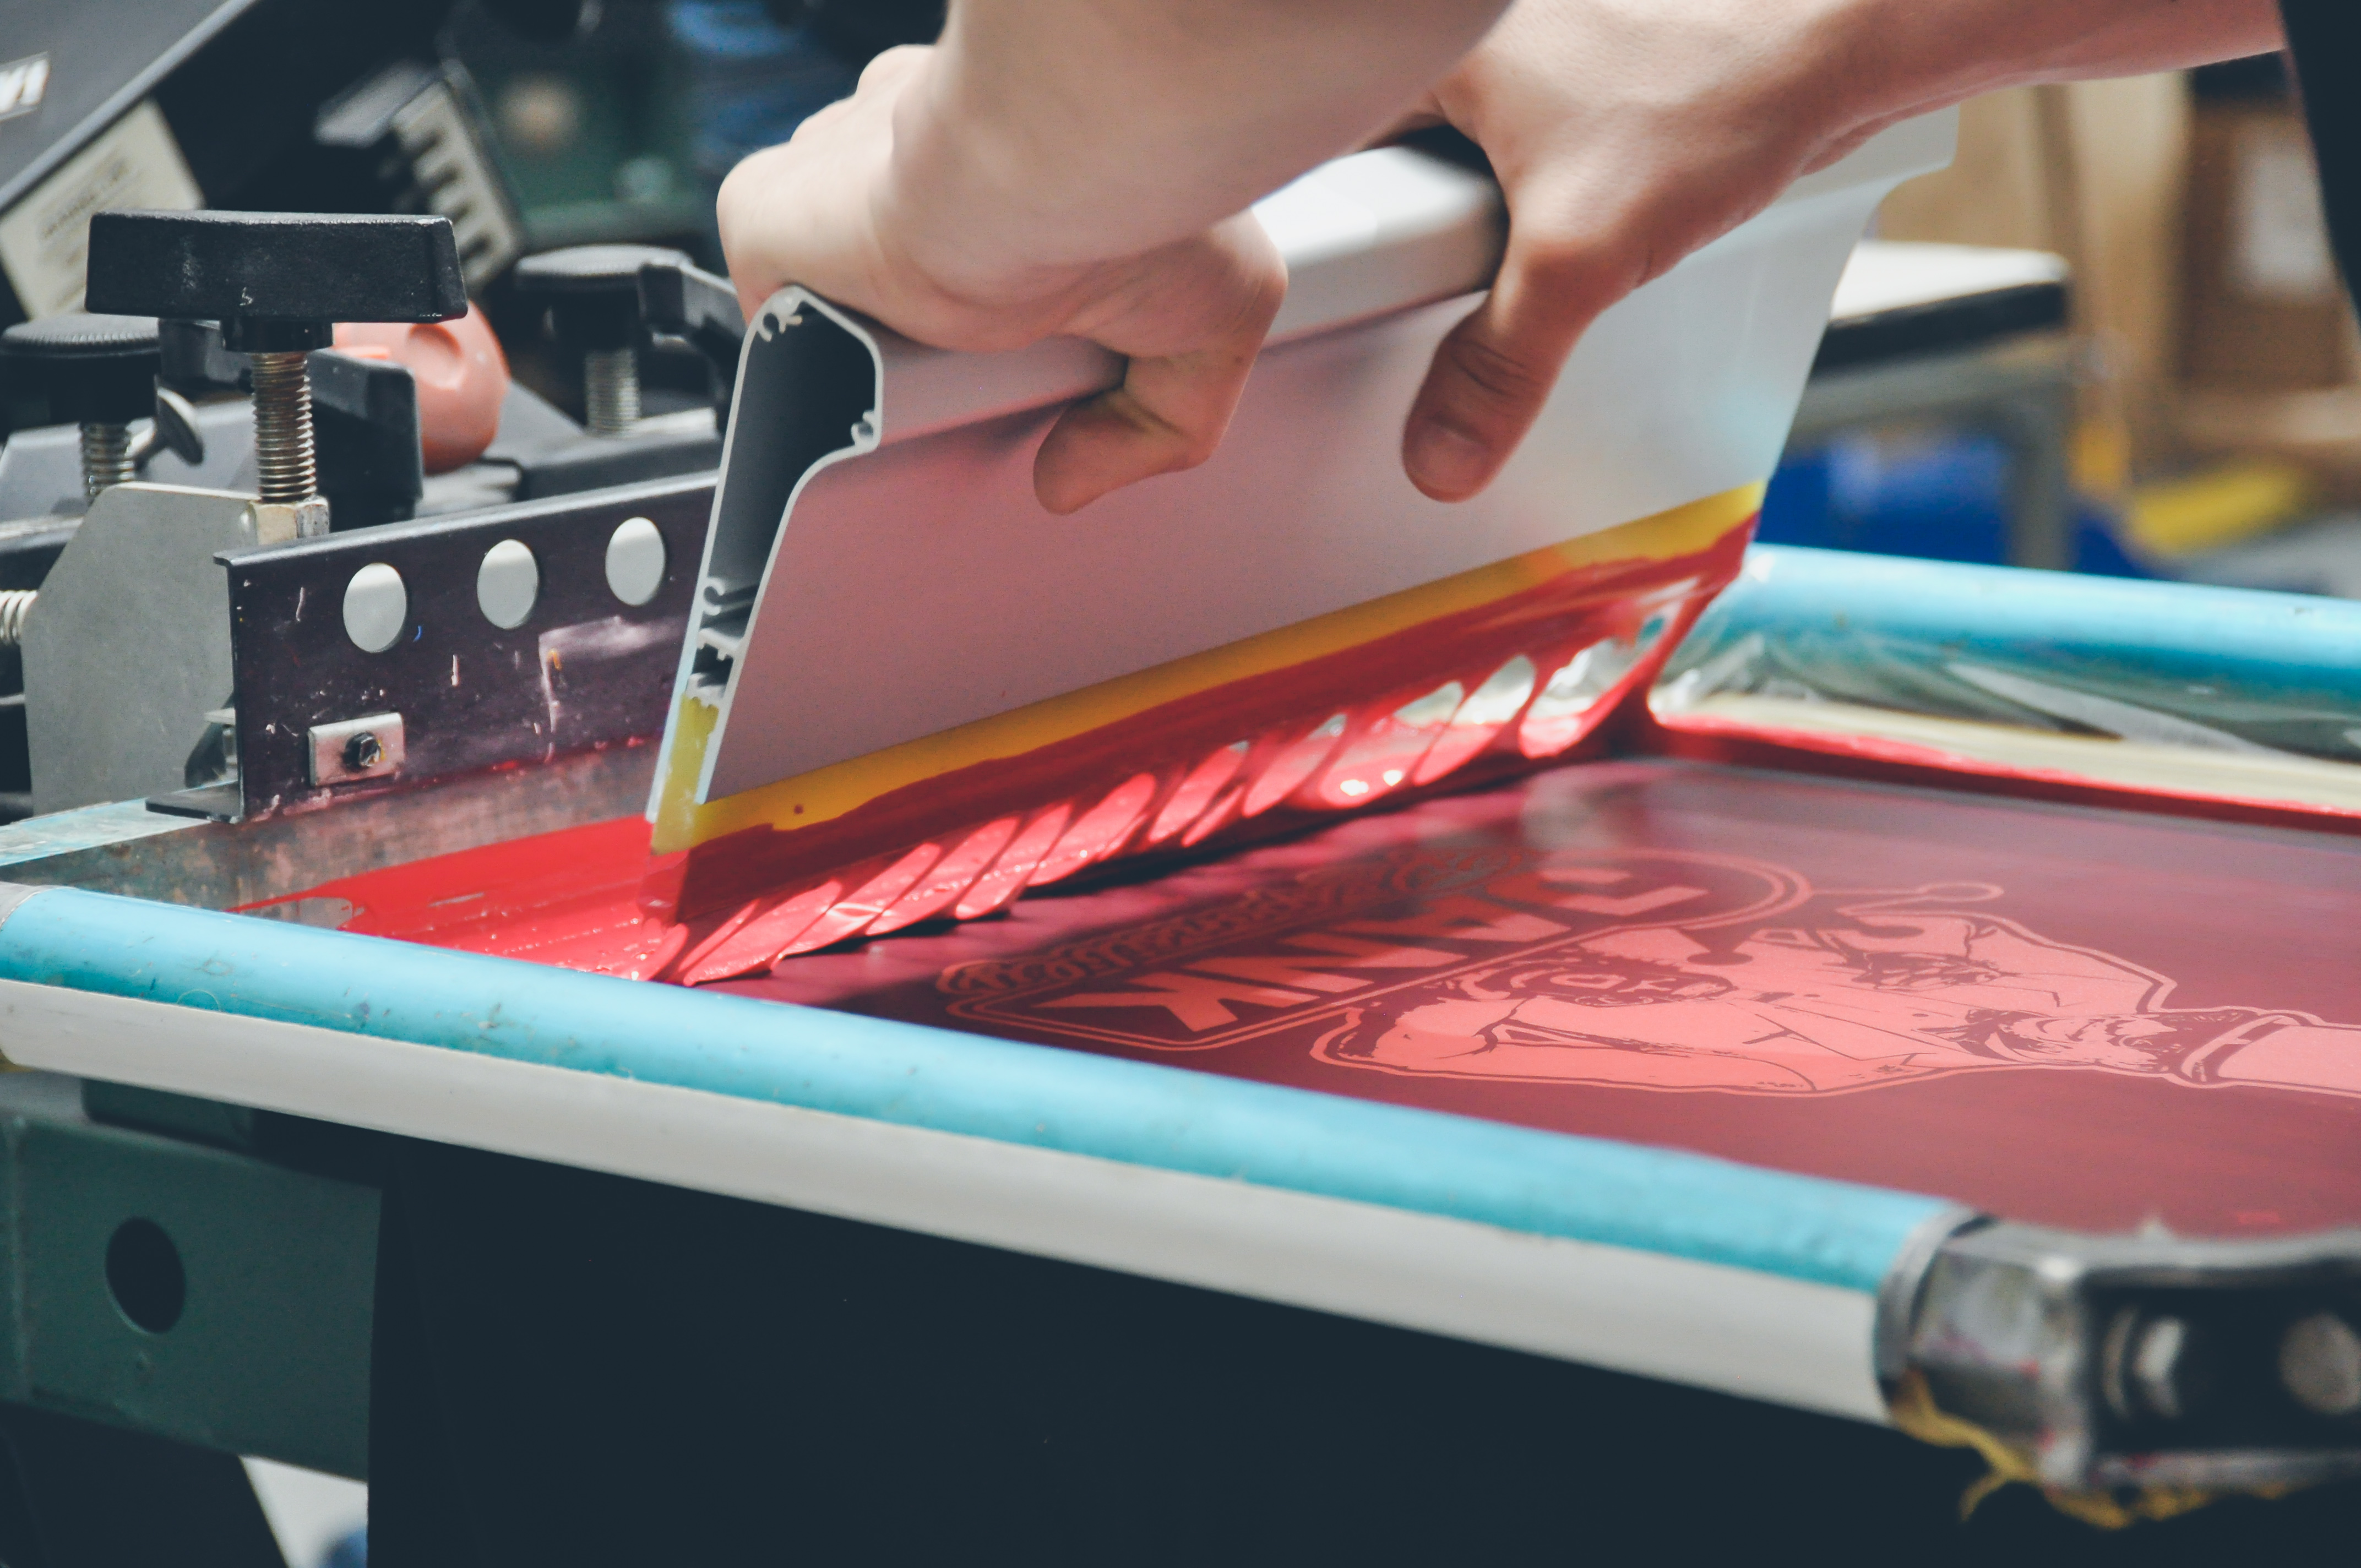 How To Make Images For Screen Printing - Best Design Idea